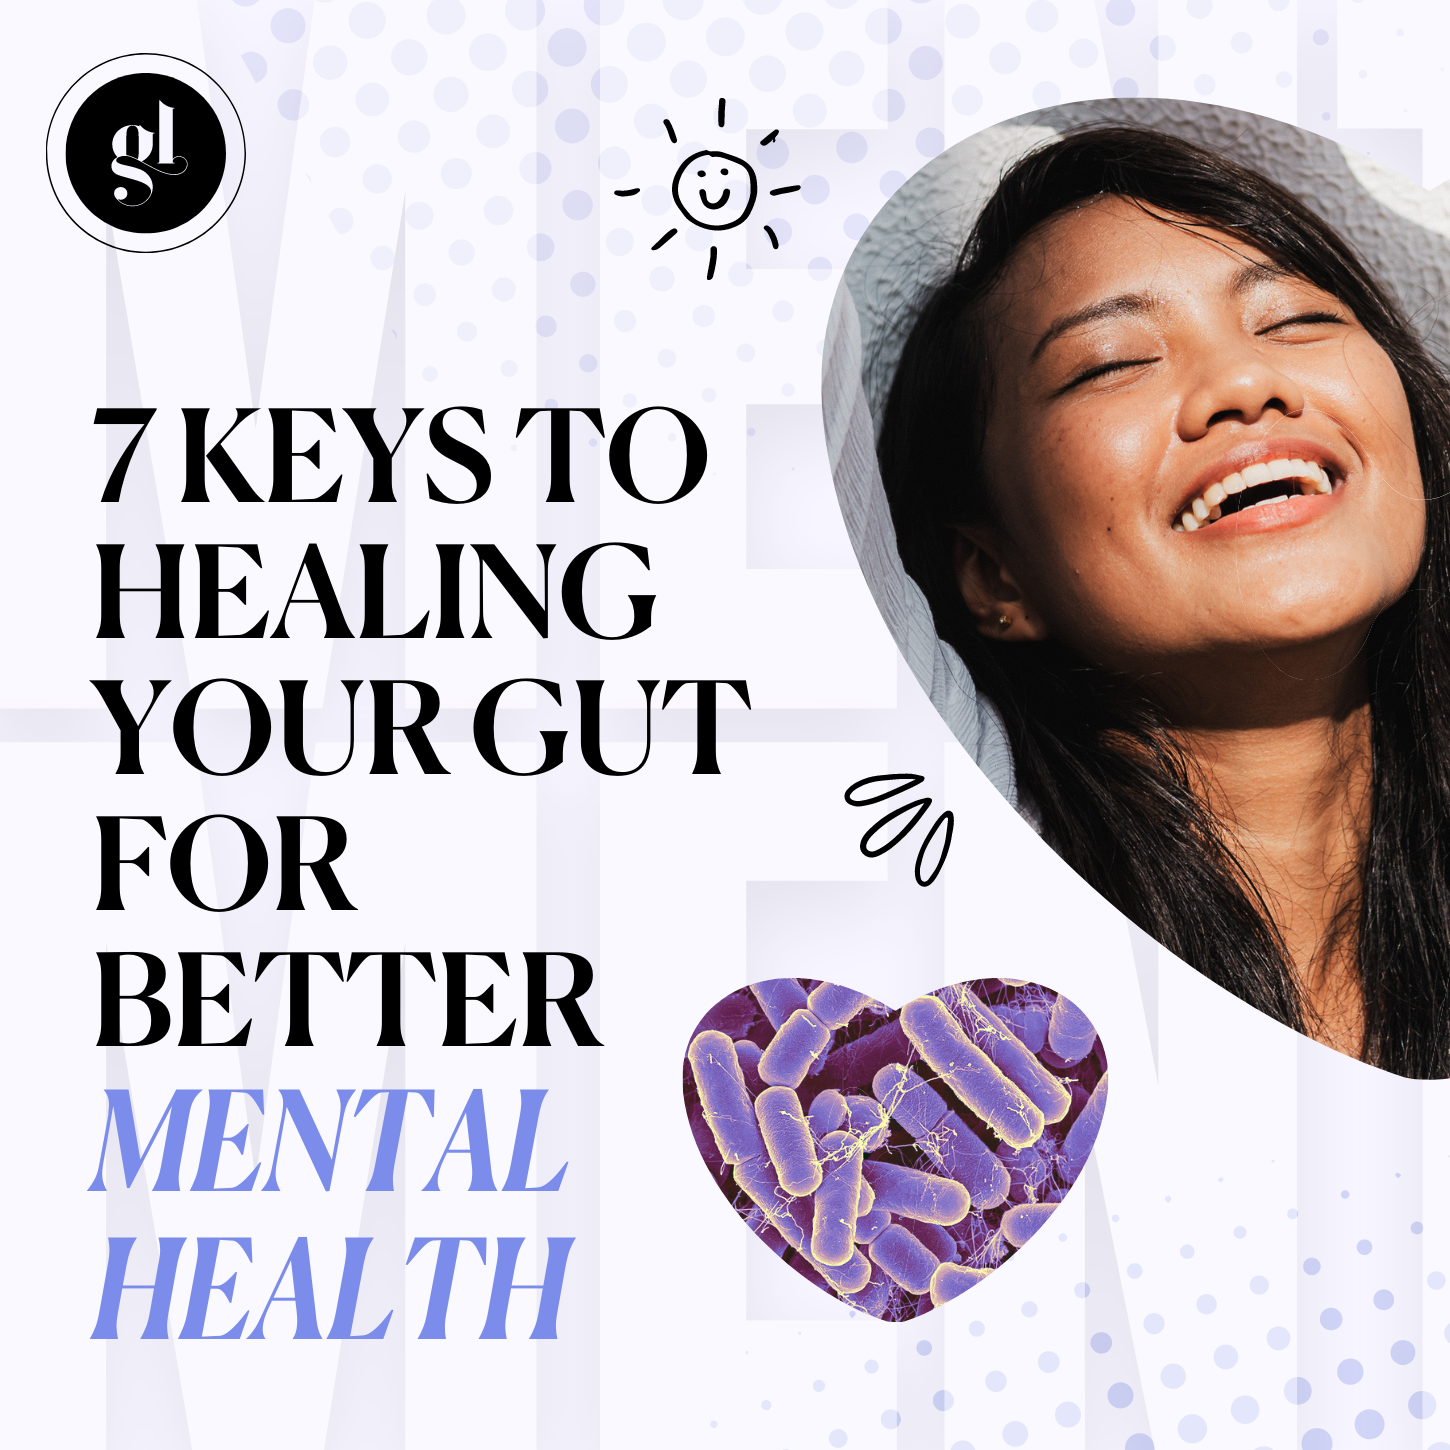 7 Keys to Healing Your Gut For Better Mental Health